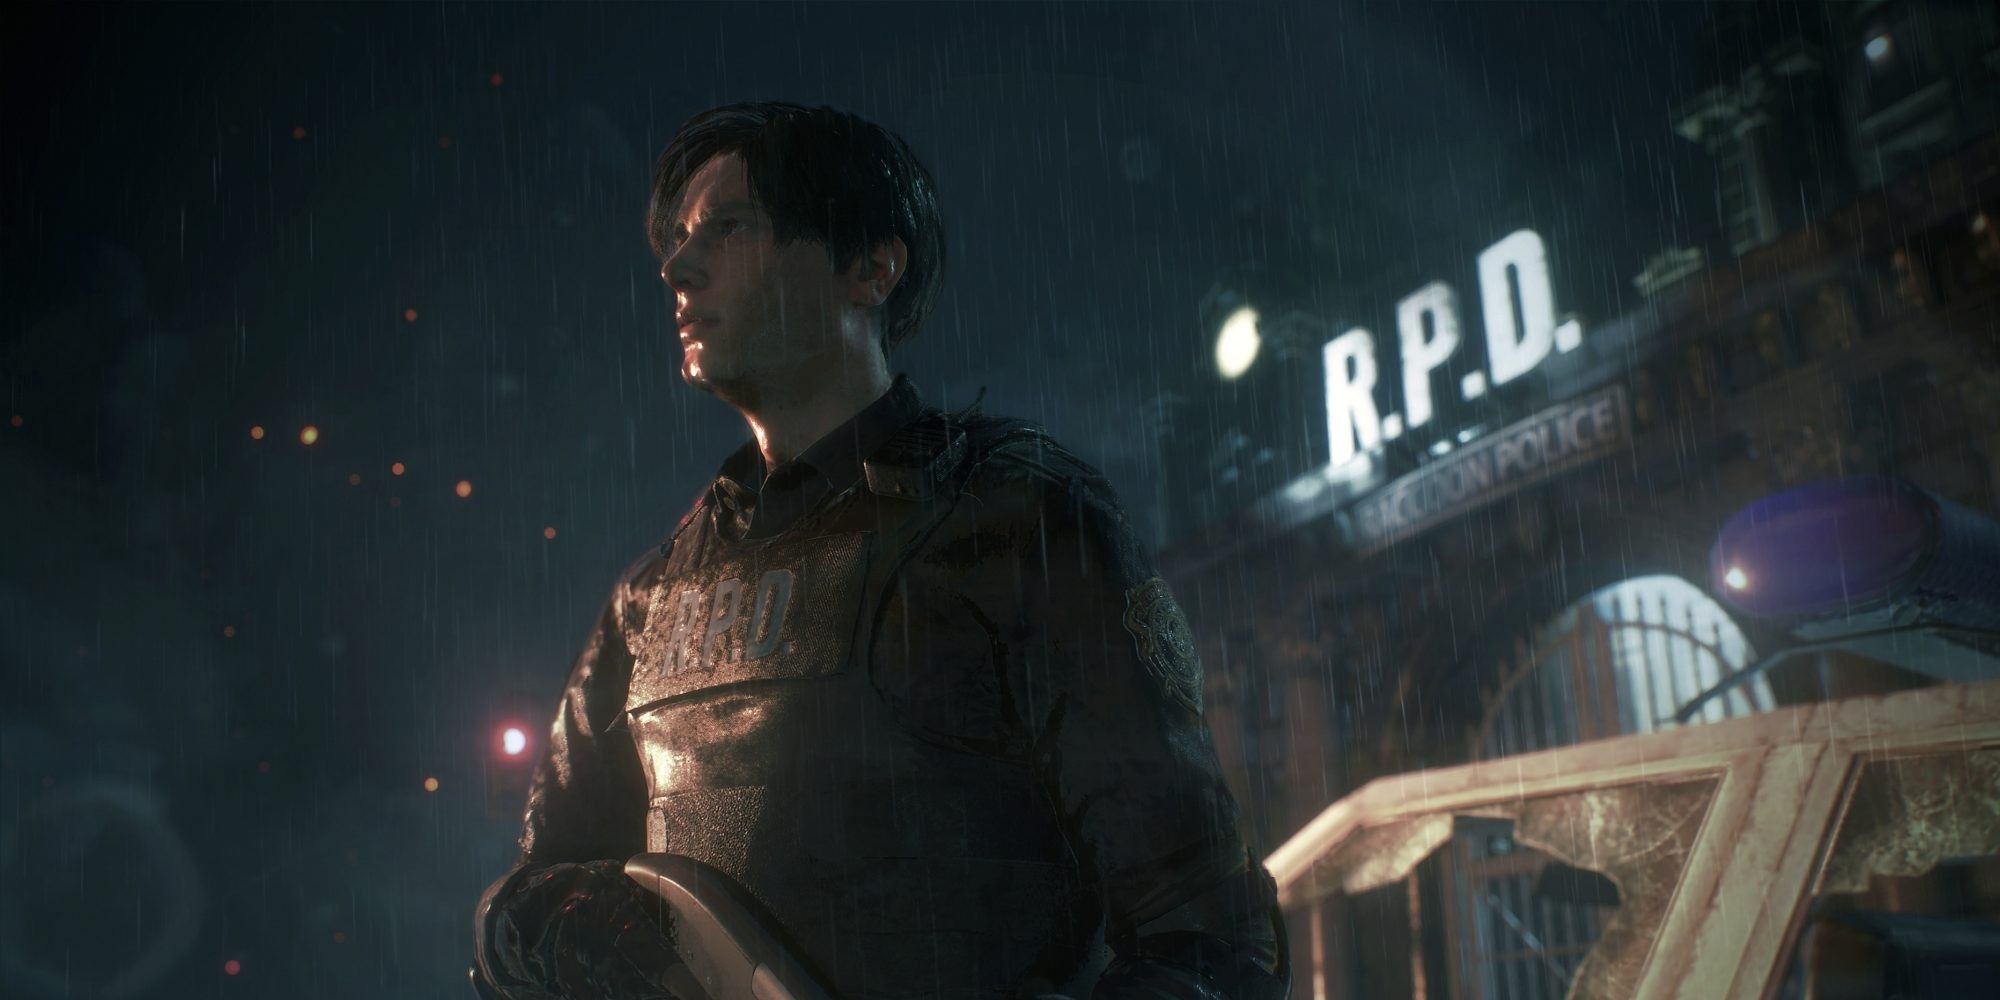 Leon in rain in front of the police station.